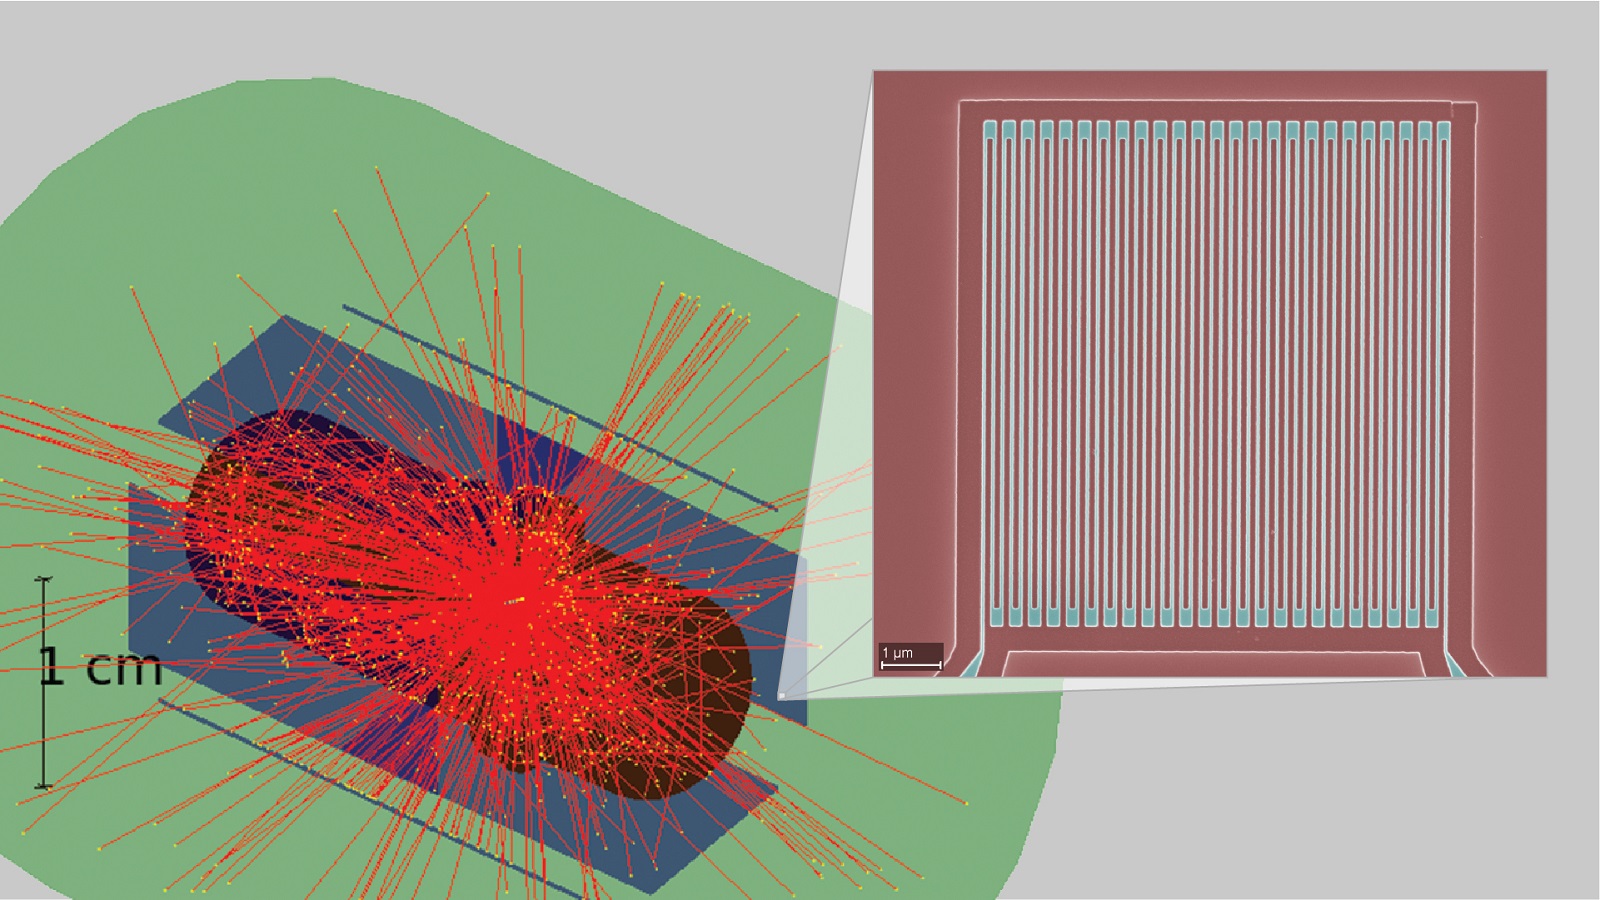 Simulation of high-speed superconducting nanowire detectors to be used in nuclear physics experiments. Green: cryogenic environment (near absolute zero) of experiment; purple: detectors; red, photons emitted from solid ammonia target at center. Inset: one of the Argonne devices in the detectors (scale bar, 1 µm).